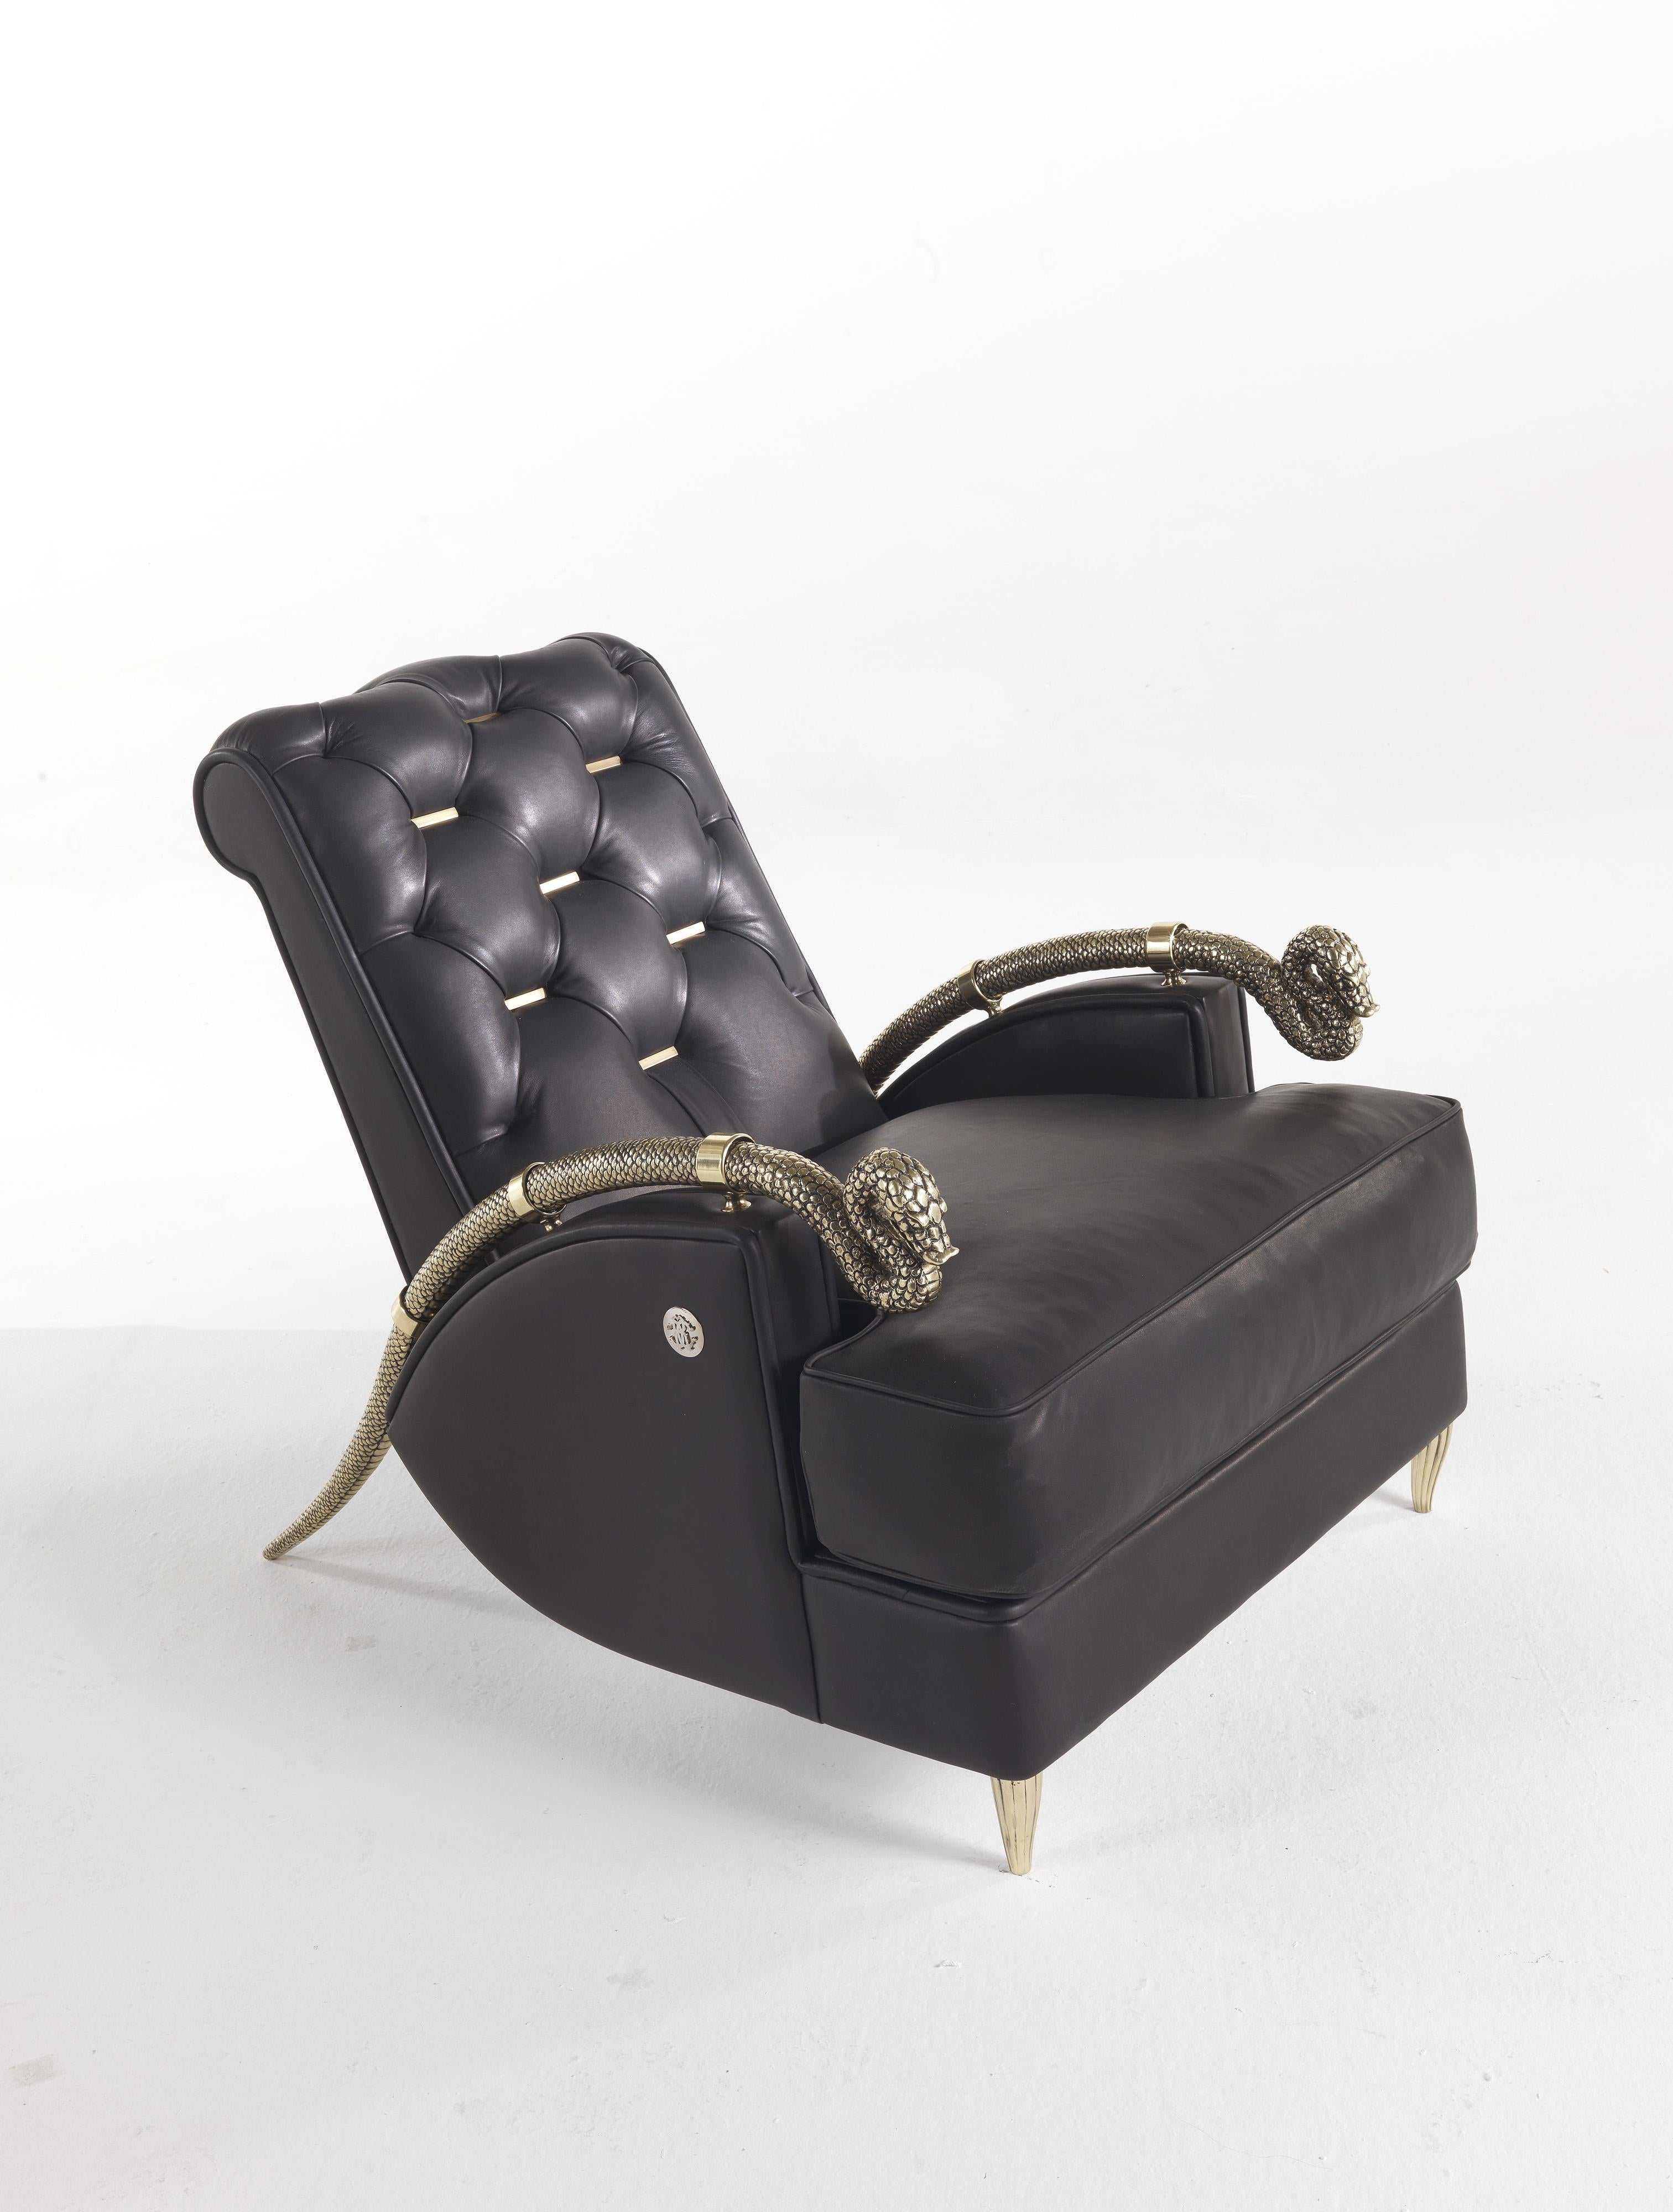 Animals inspire interiors! A really aggressive armchair with the two golden snakes that act as armrests, recalling the rich details used in Roberto Cavalli's world. 
Snake Armchair with structure in poplar wood and foam. Upholstery in leather CAT. A